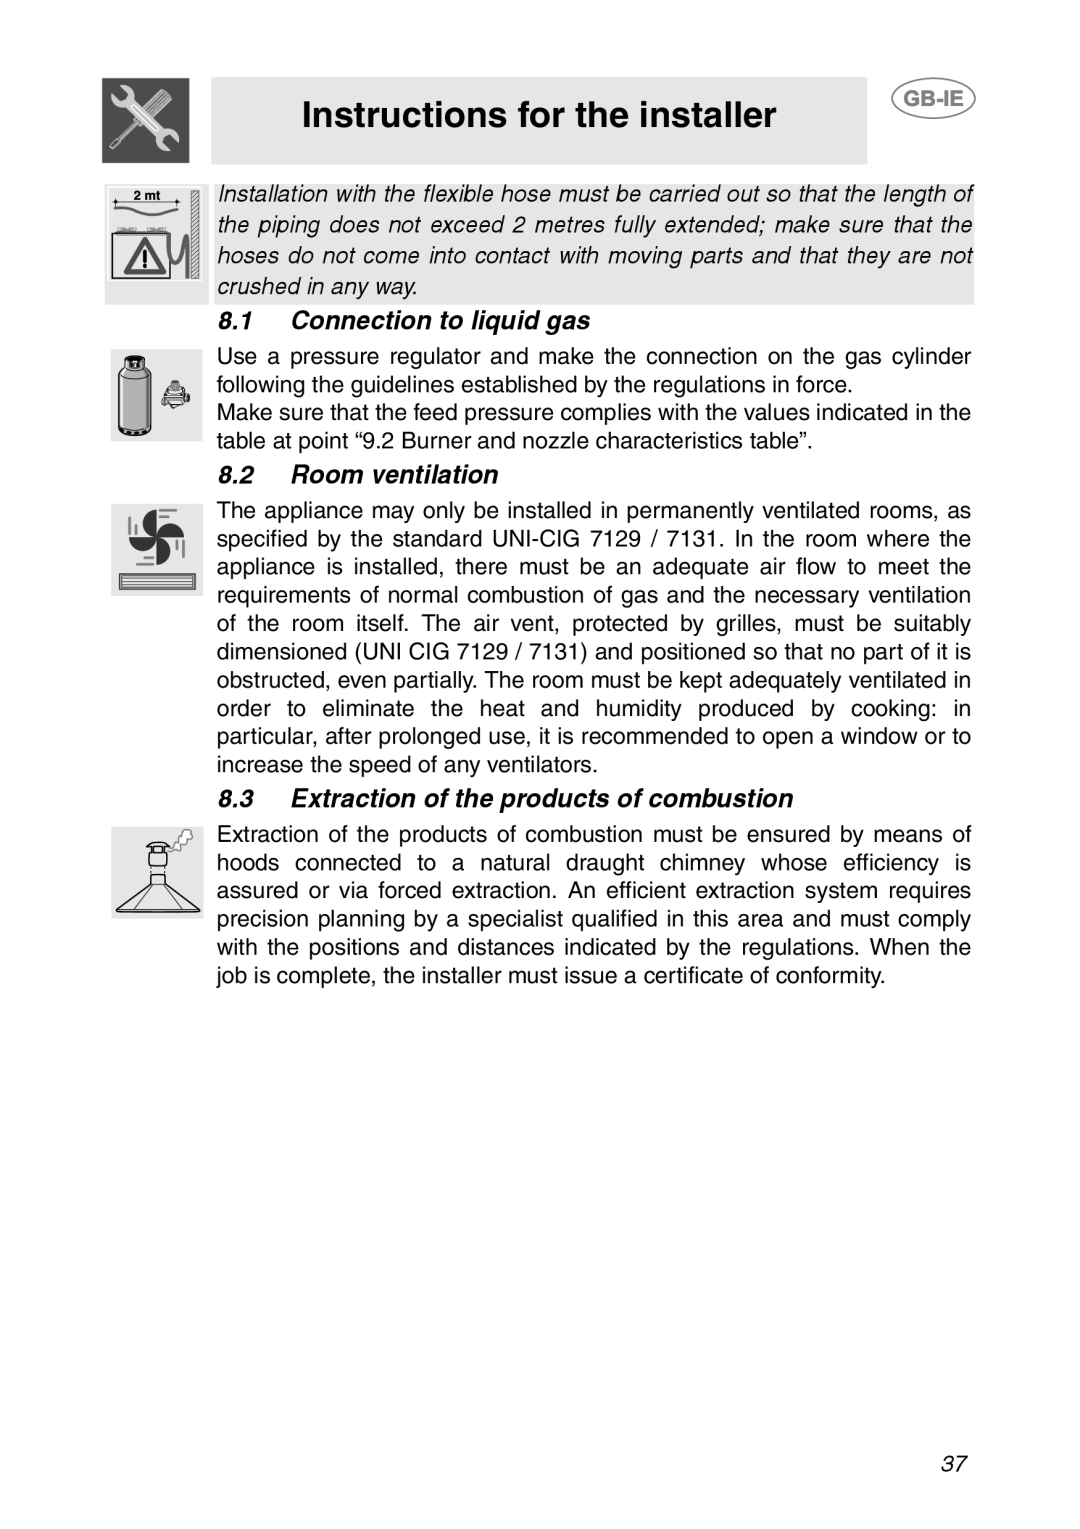 Smeg HB96GXBE3, HB96CSS-3 manual Instructions for the installer, 8.1Connection to liquid gas, 8.2Room ventilation 